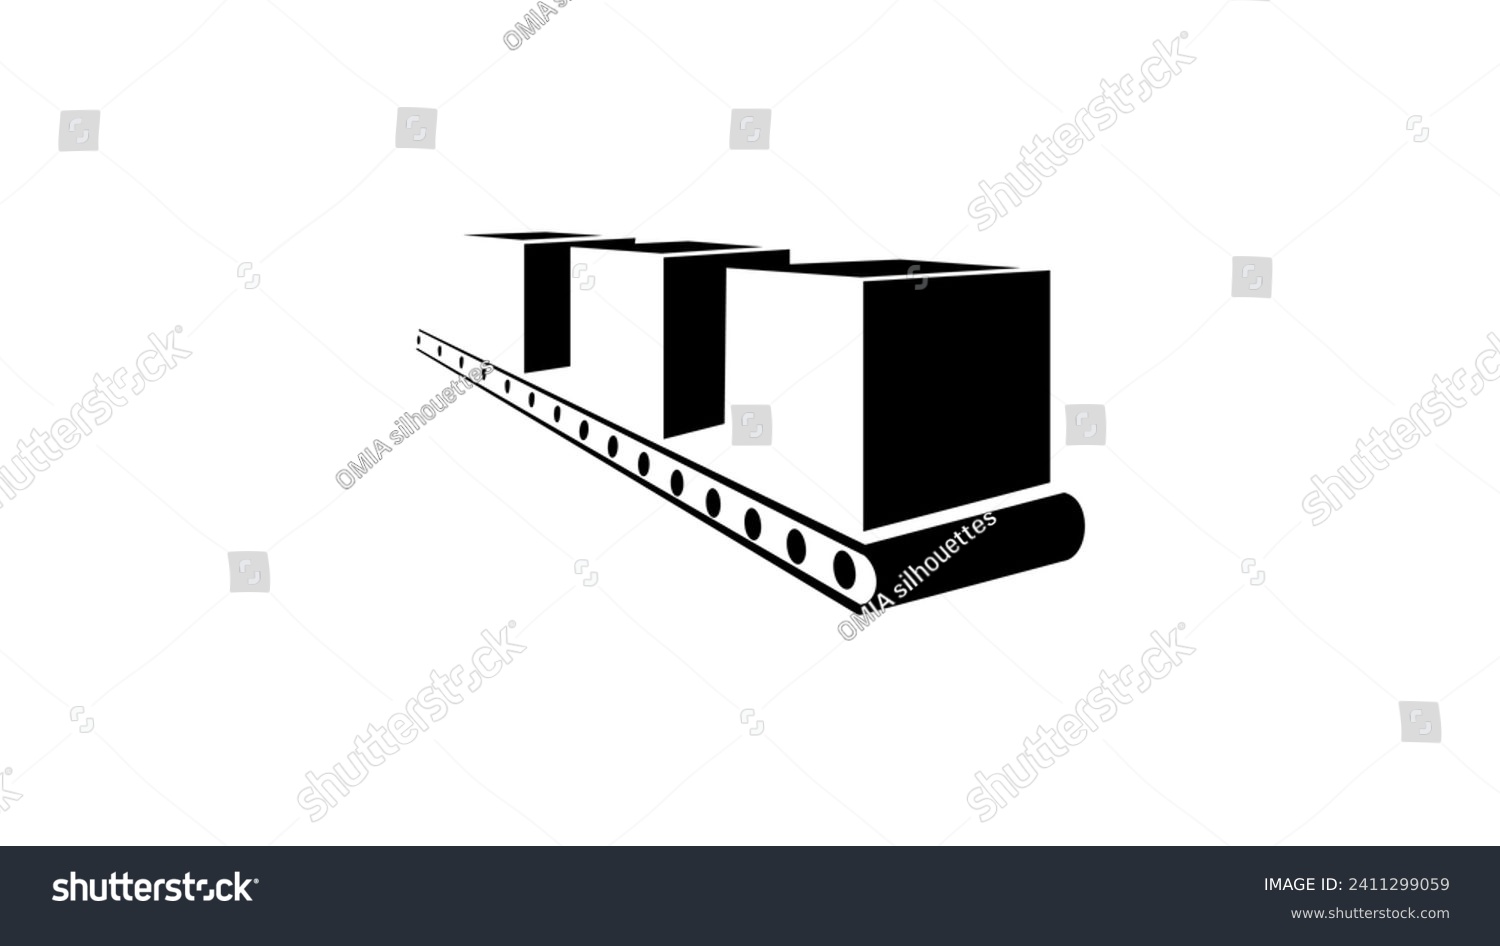 SVG of Conveyor line, boxes on a conveyor, black isolated silhouette svg